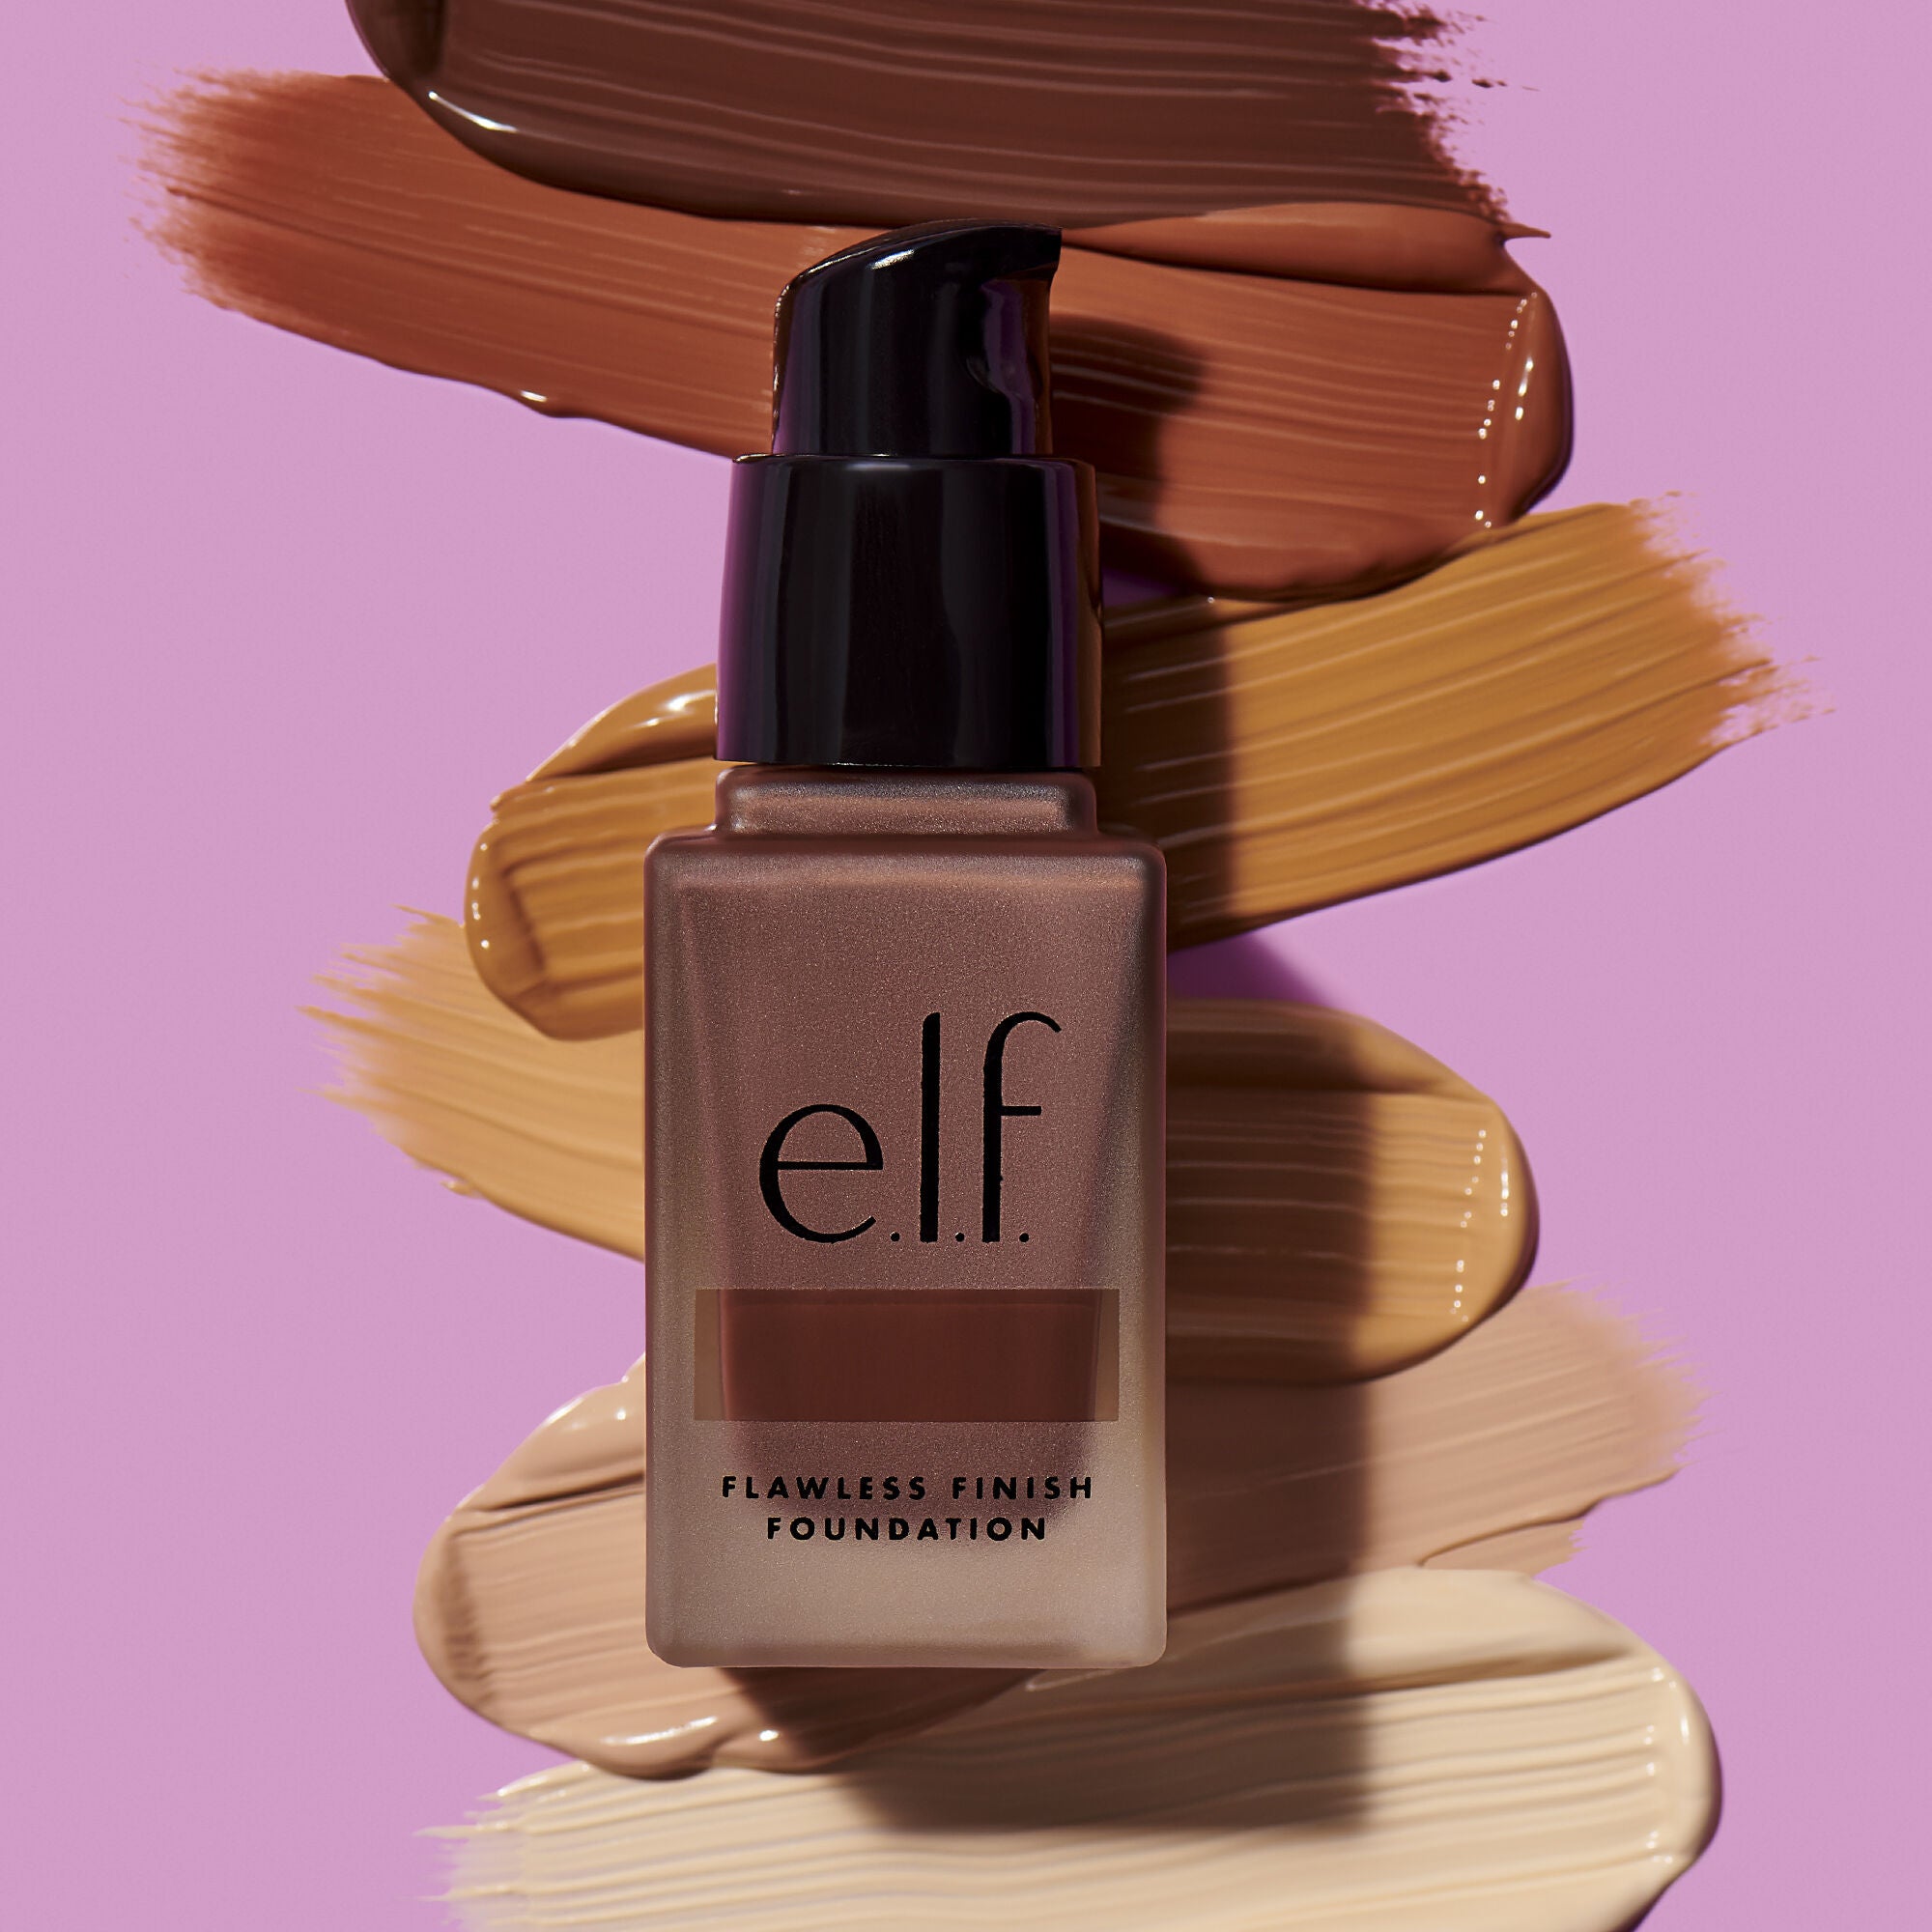 elf Flawless Finish Foundation SPF15 with swatches